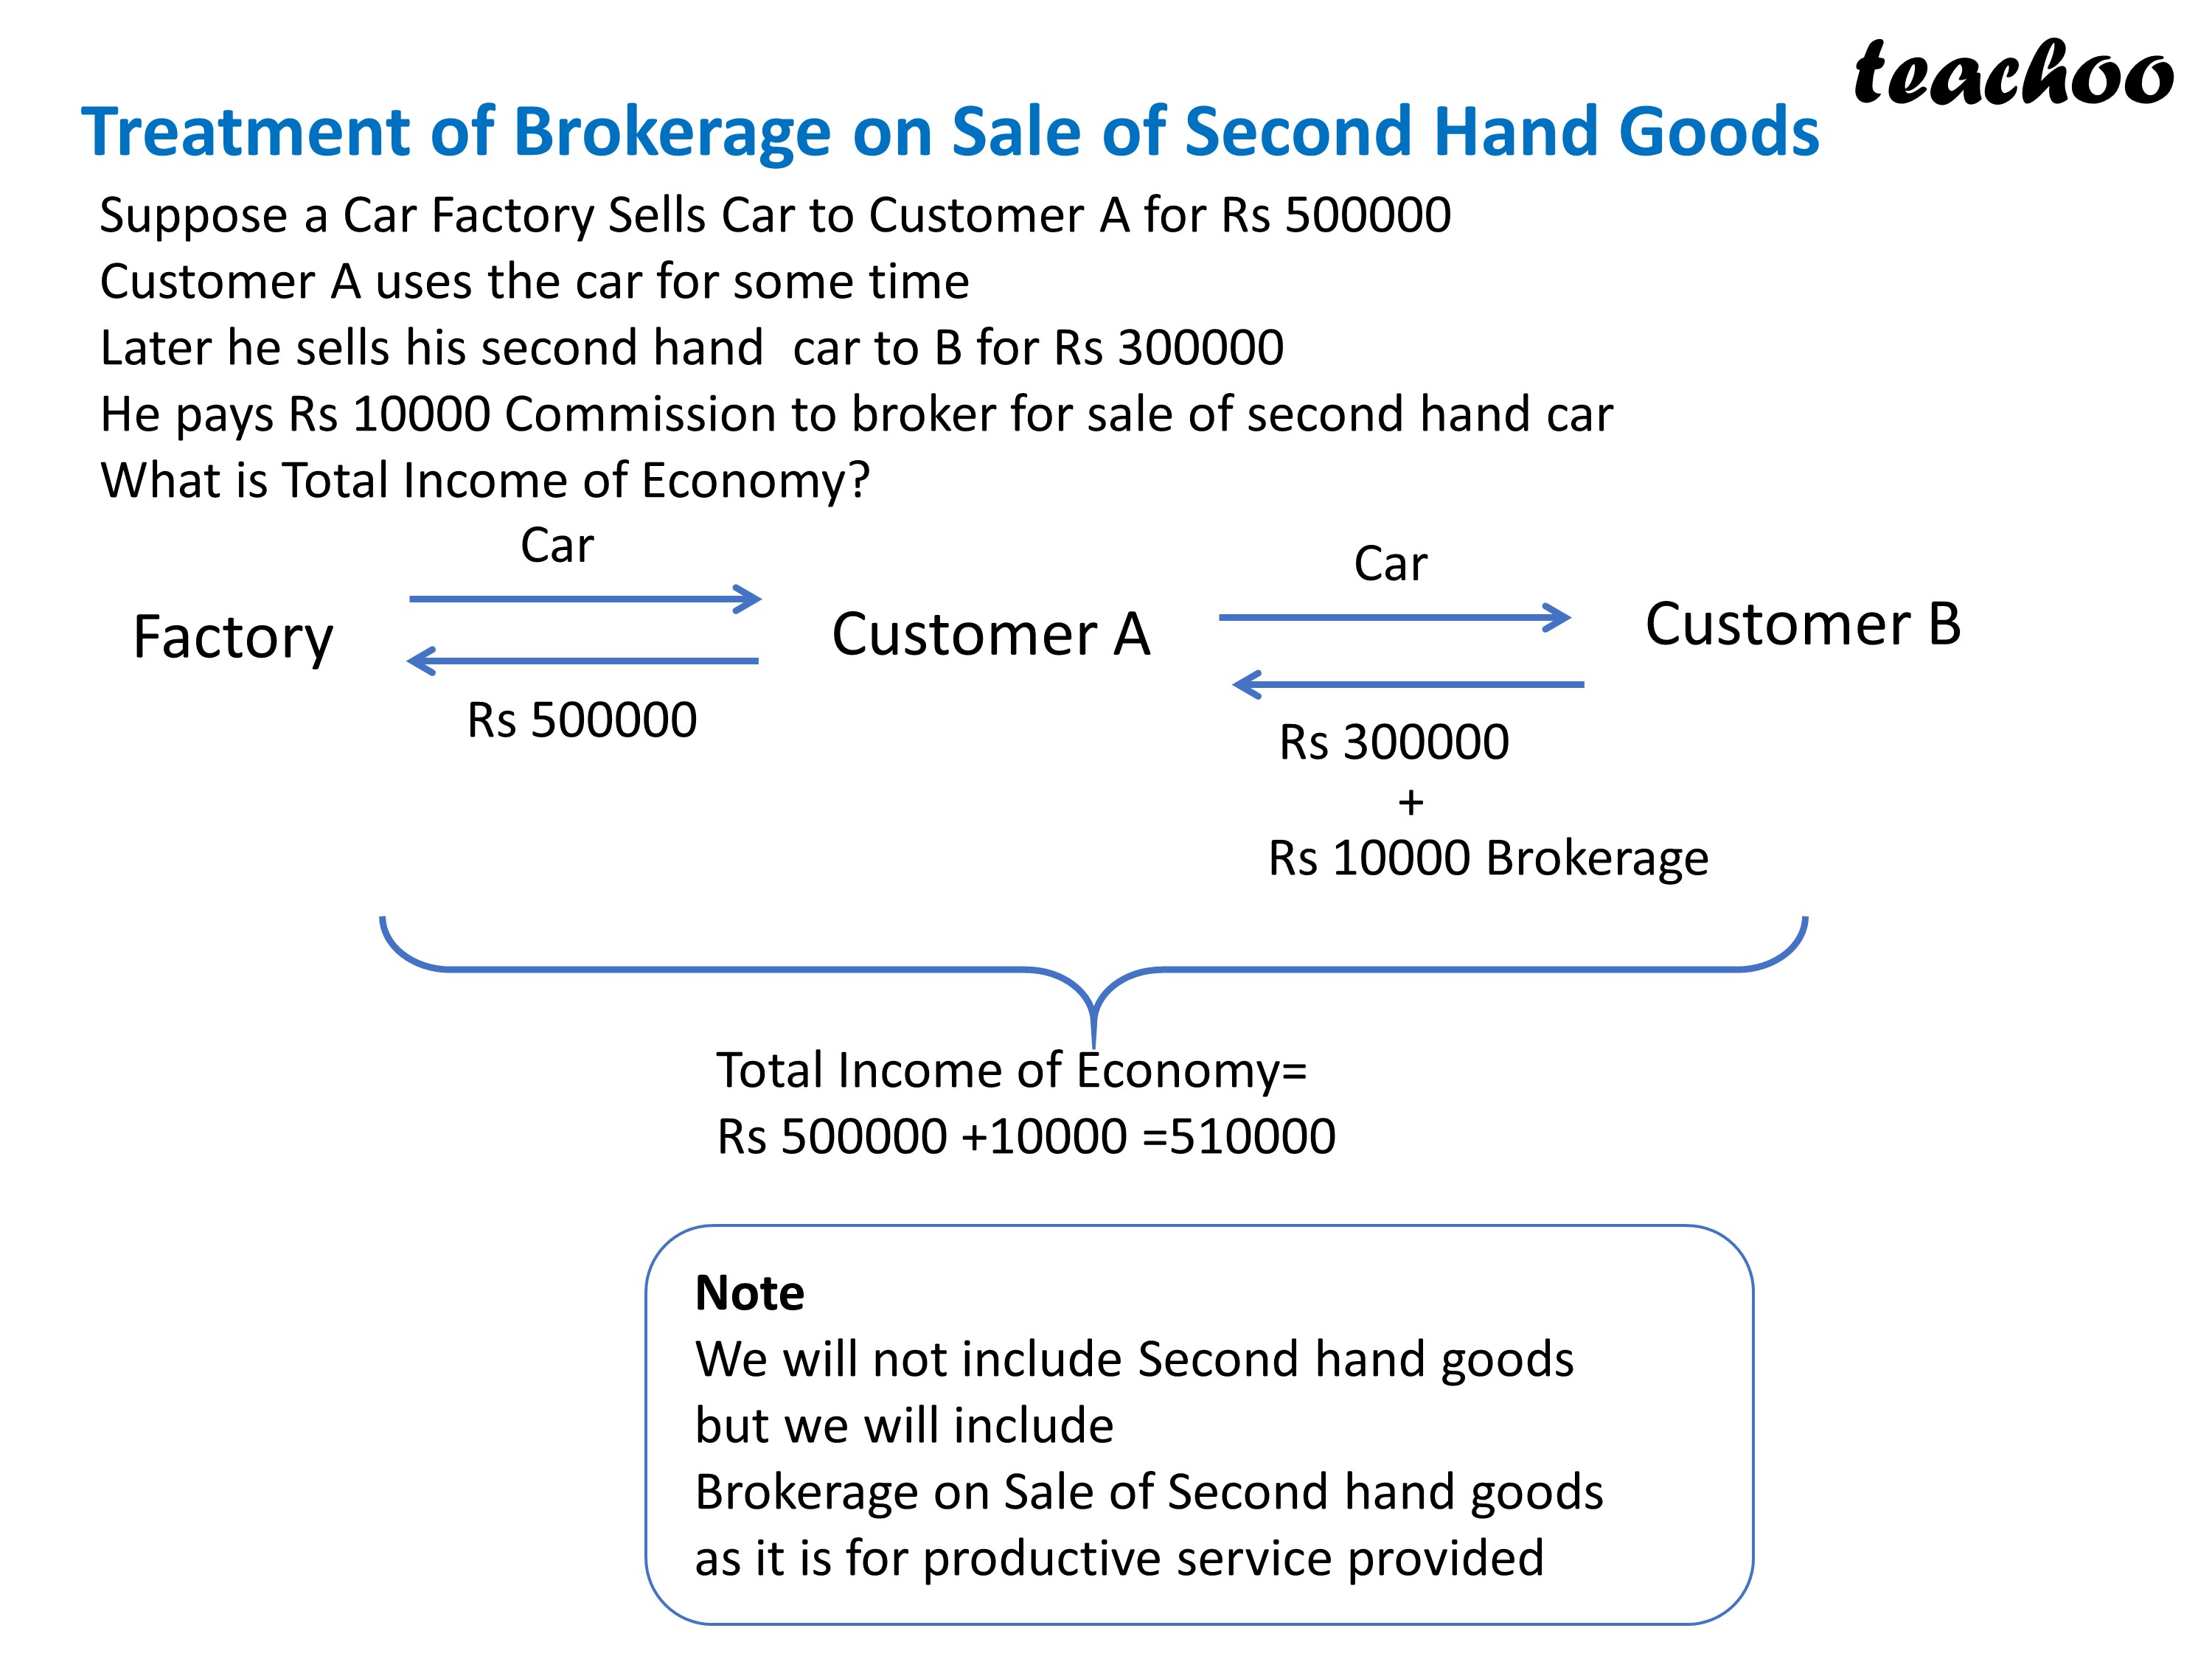 Treatment of Brokerage on Sale of Second Hand Goods.JPG